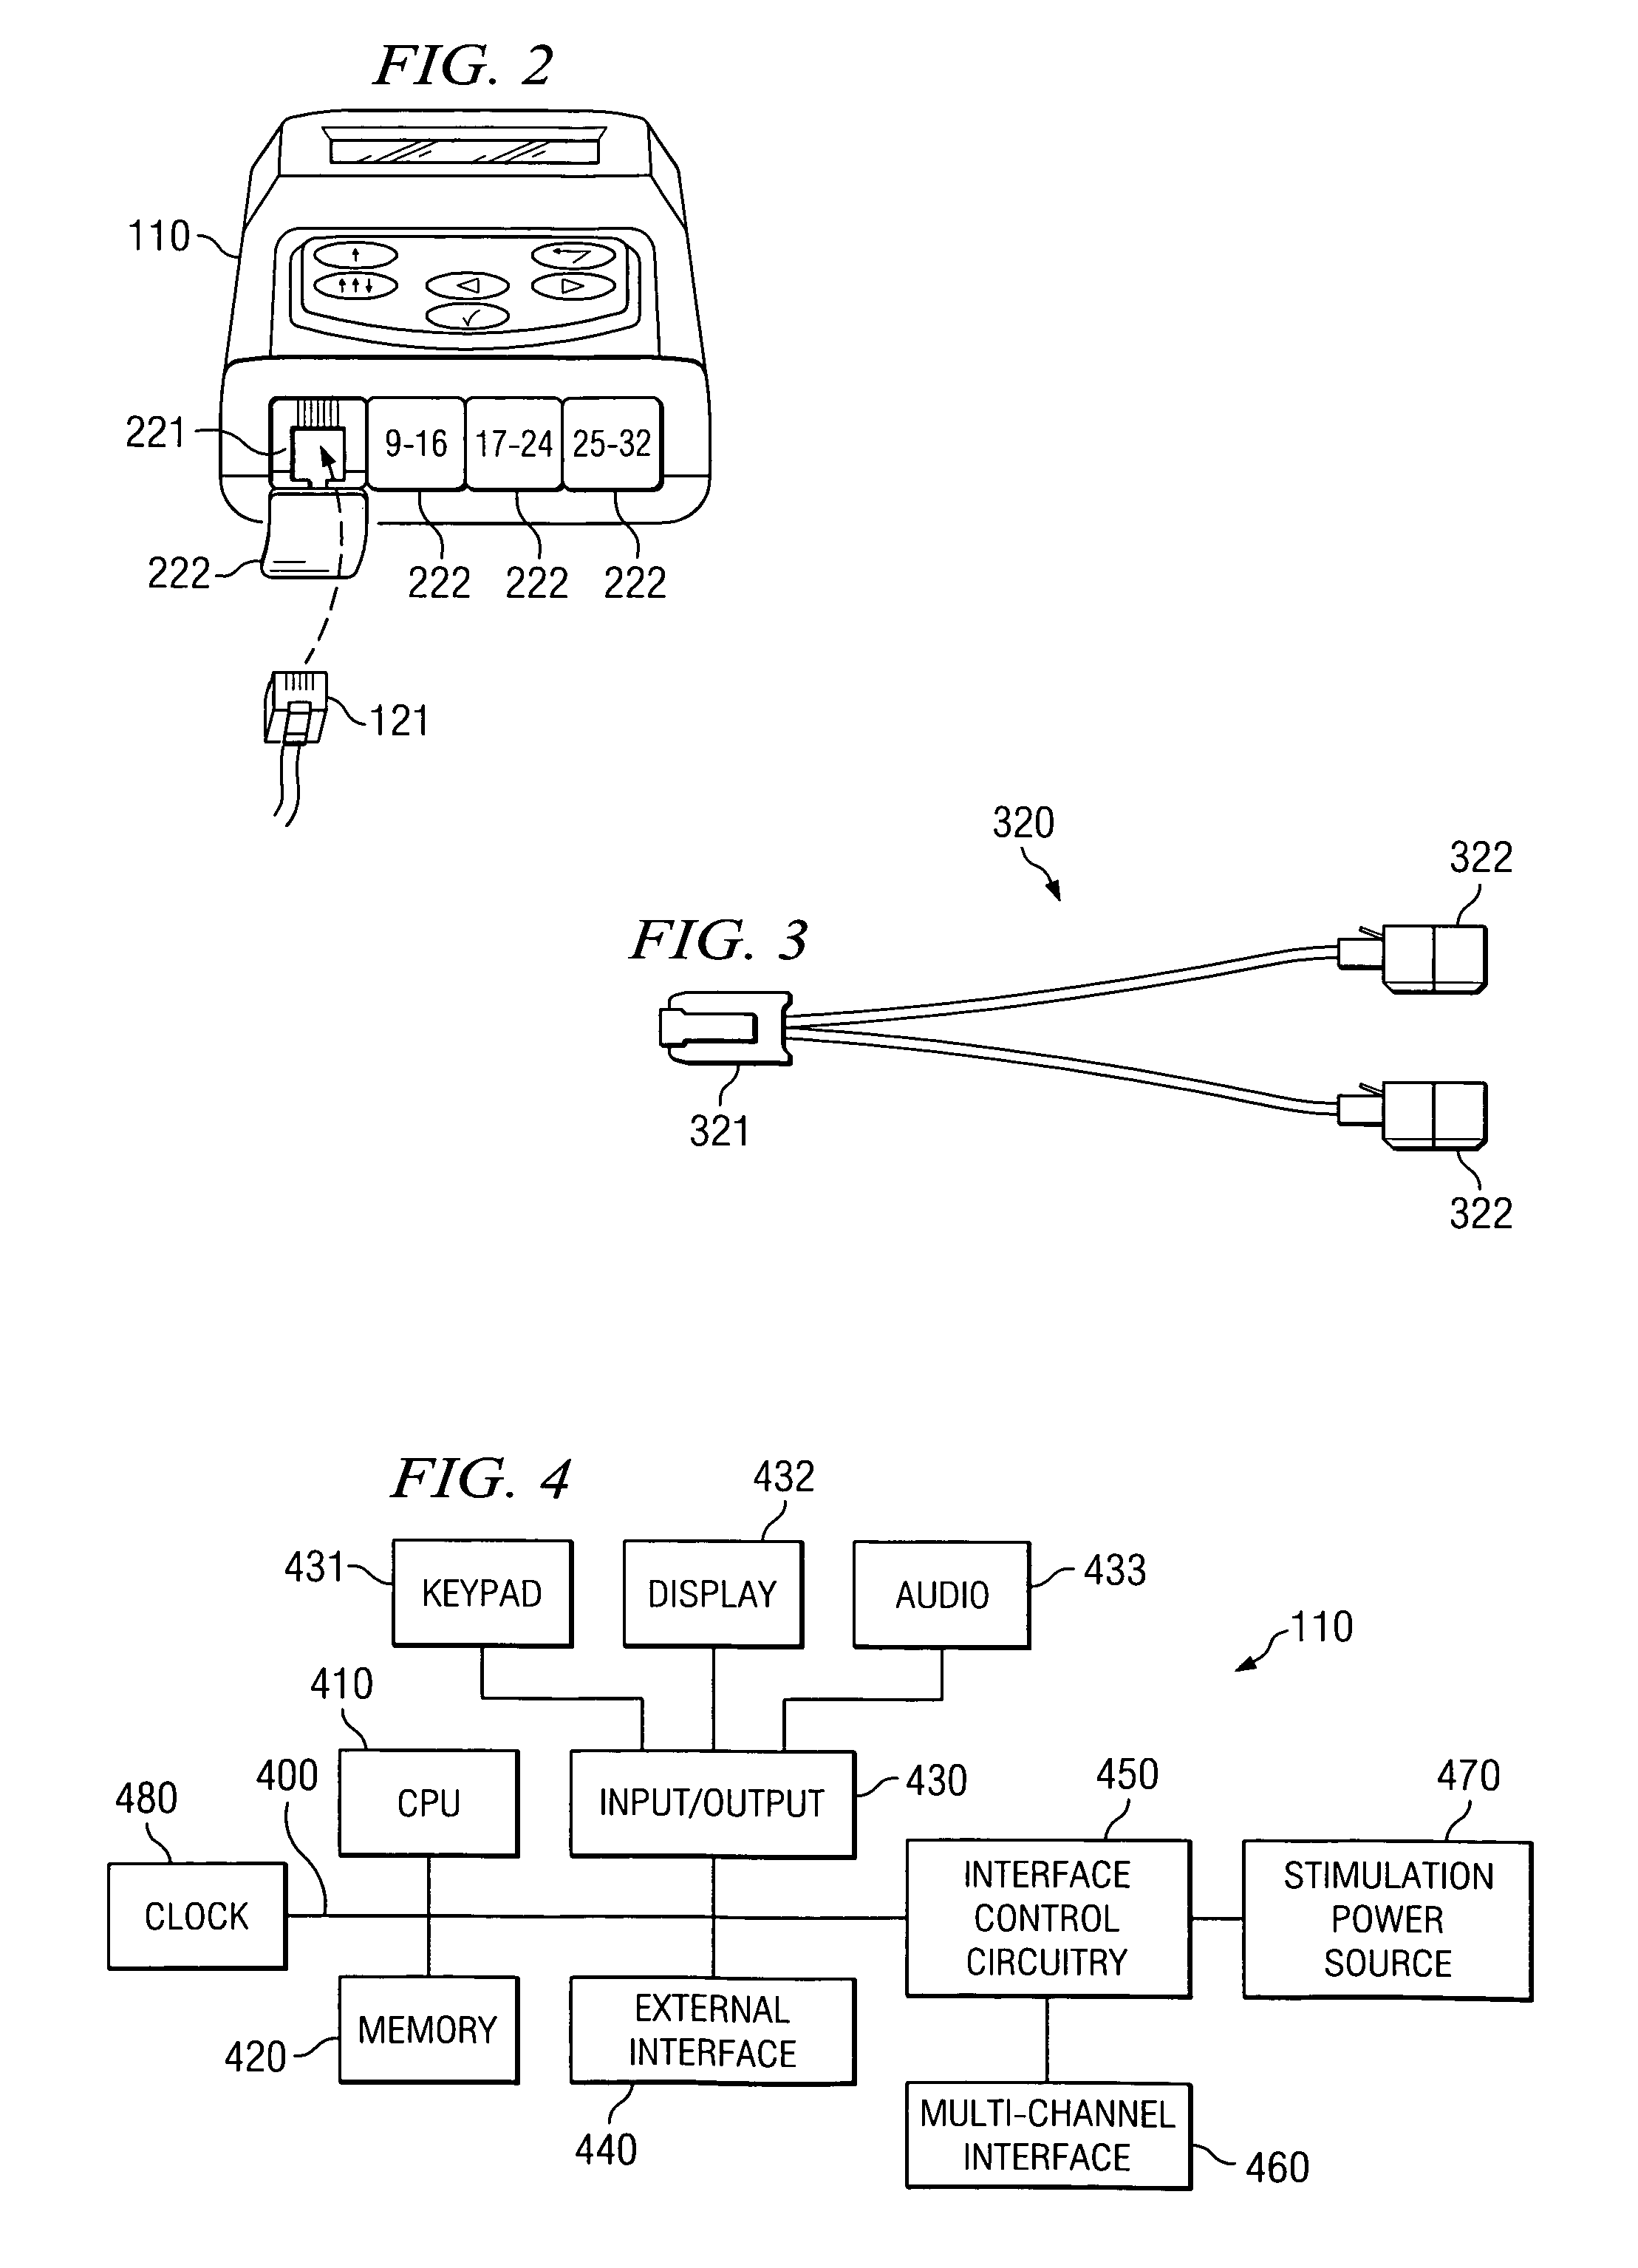 Clinician programmer for use with trial stimulator